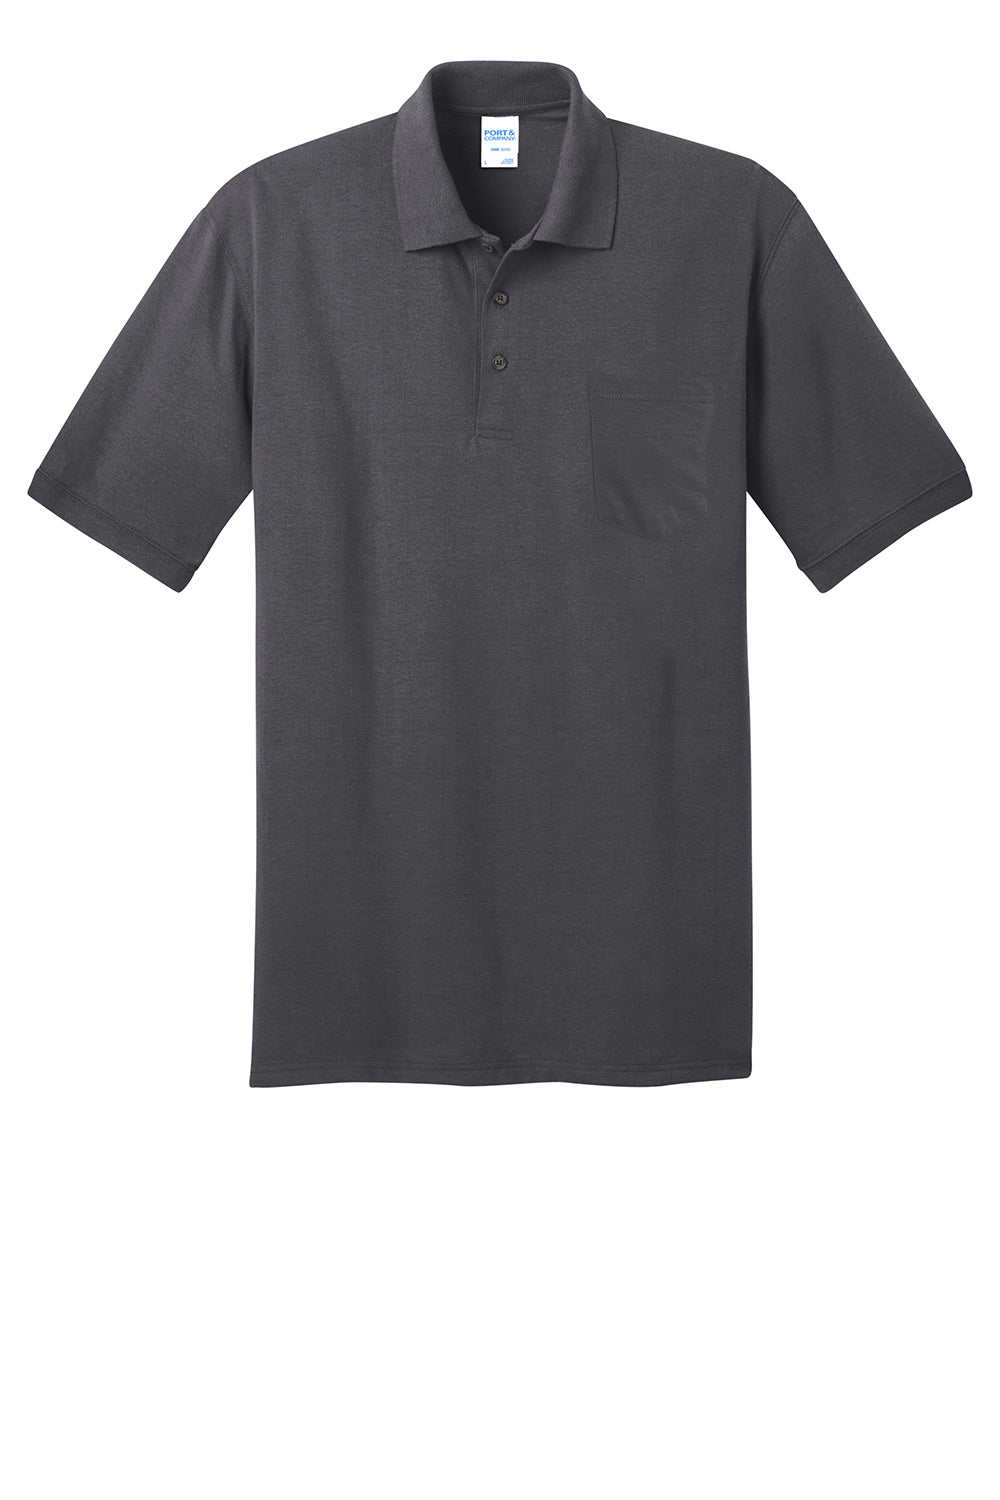 Port & Company KP55P Mens Core Stain Resistant Short Sleeve Polo Shirt w/ Pocket Charcoal Grey Flat Front